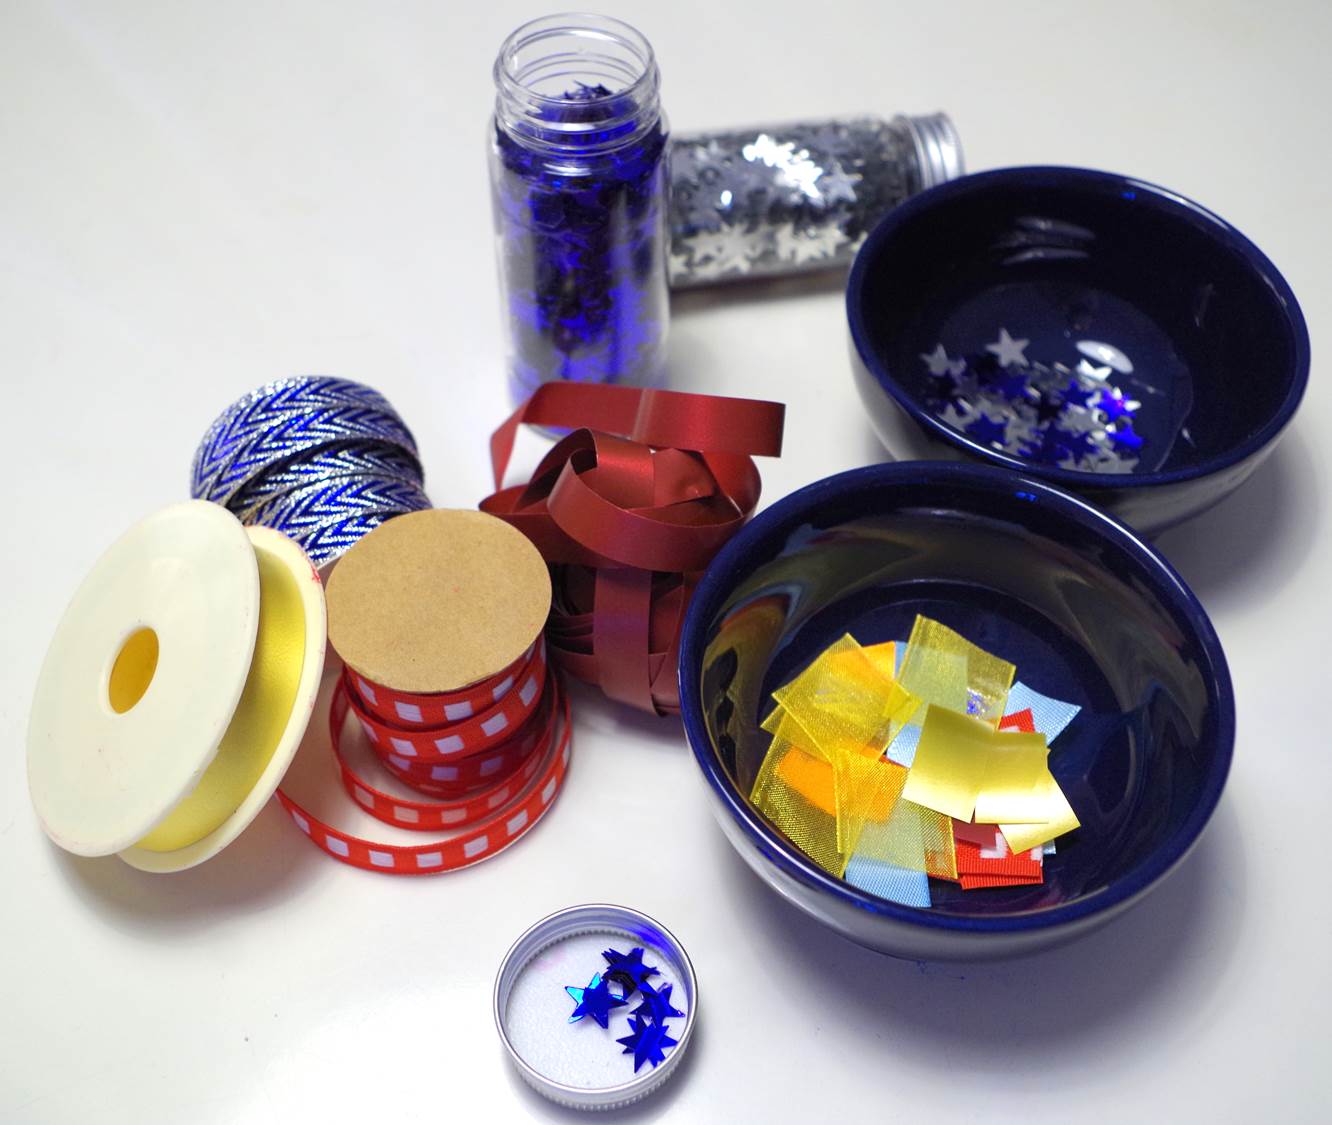 A selection of craft supplies. Sometimes all you need to inspire you to do some crafts are some basic materials!